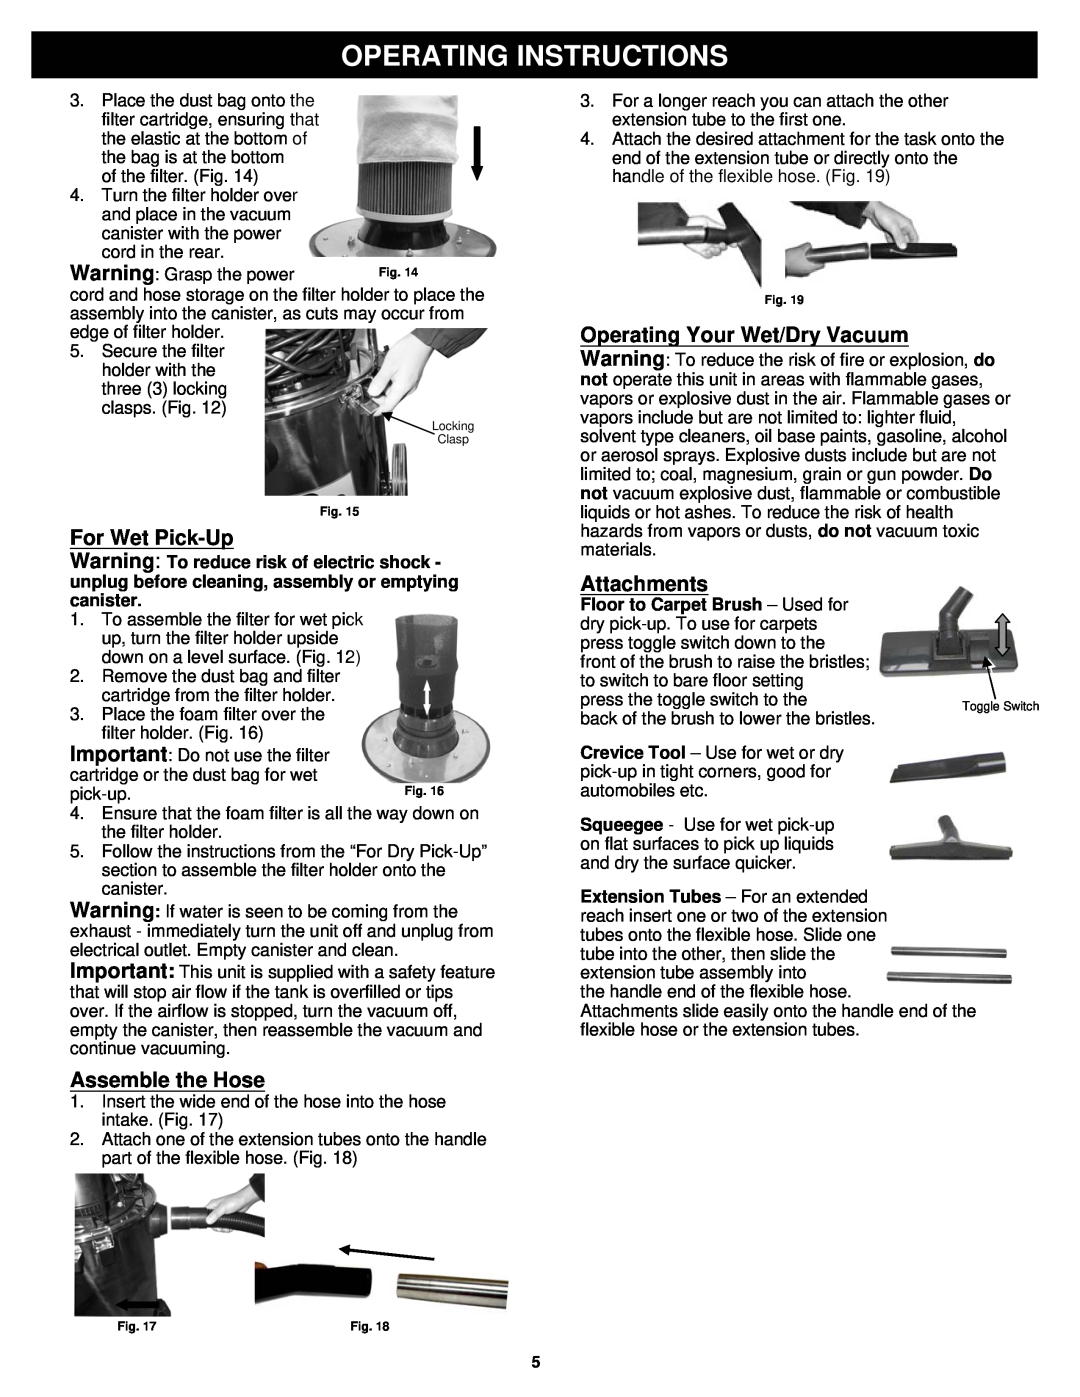 Fantom Vacuum CW233H owner manual Operating Instructions, For Wet Pick-Up, Assemble the Hose, Attachments 